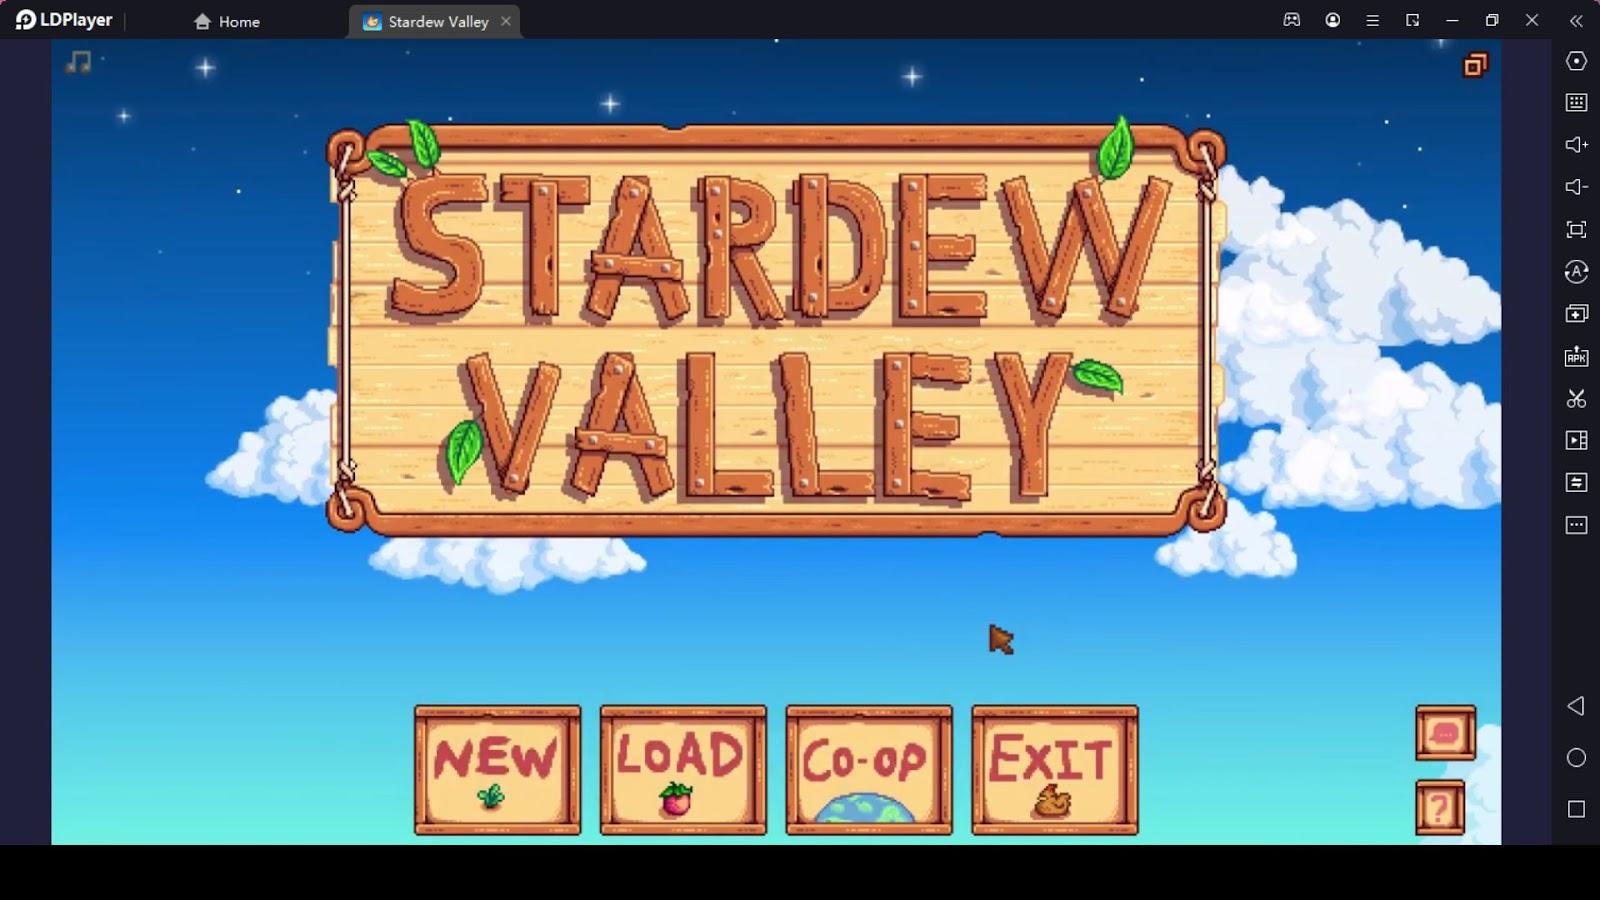 Best Stardew Valley Farm Layouts to Form